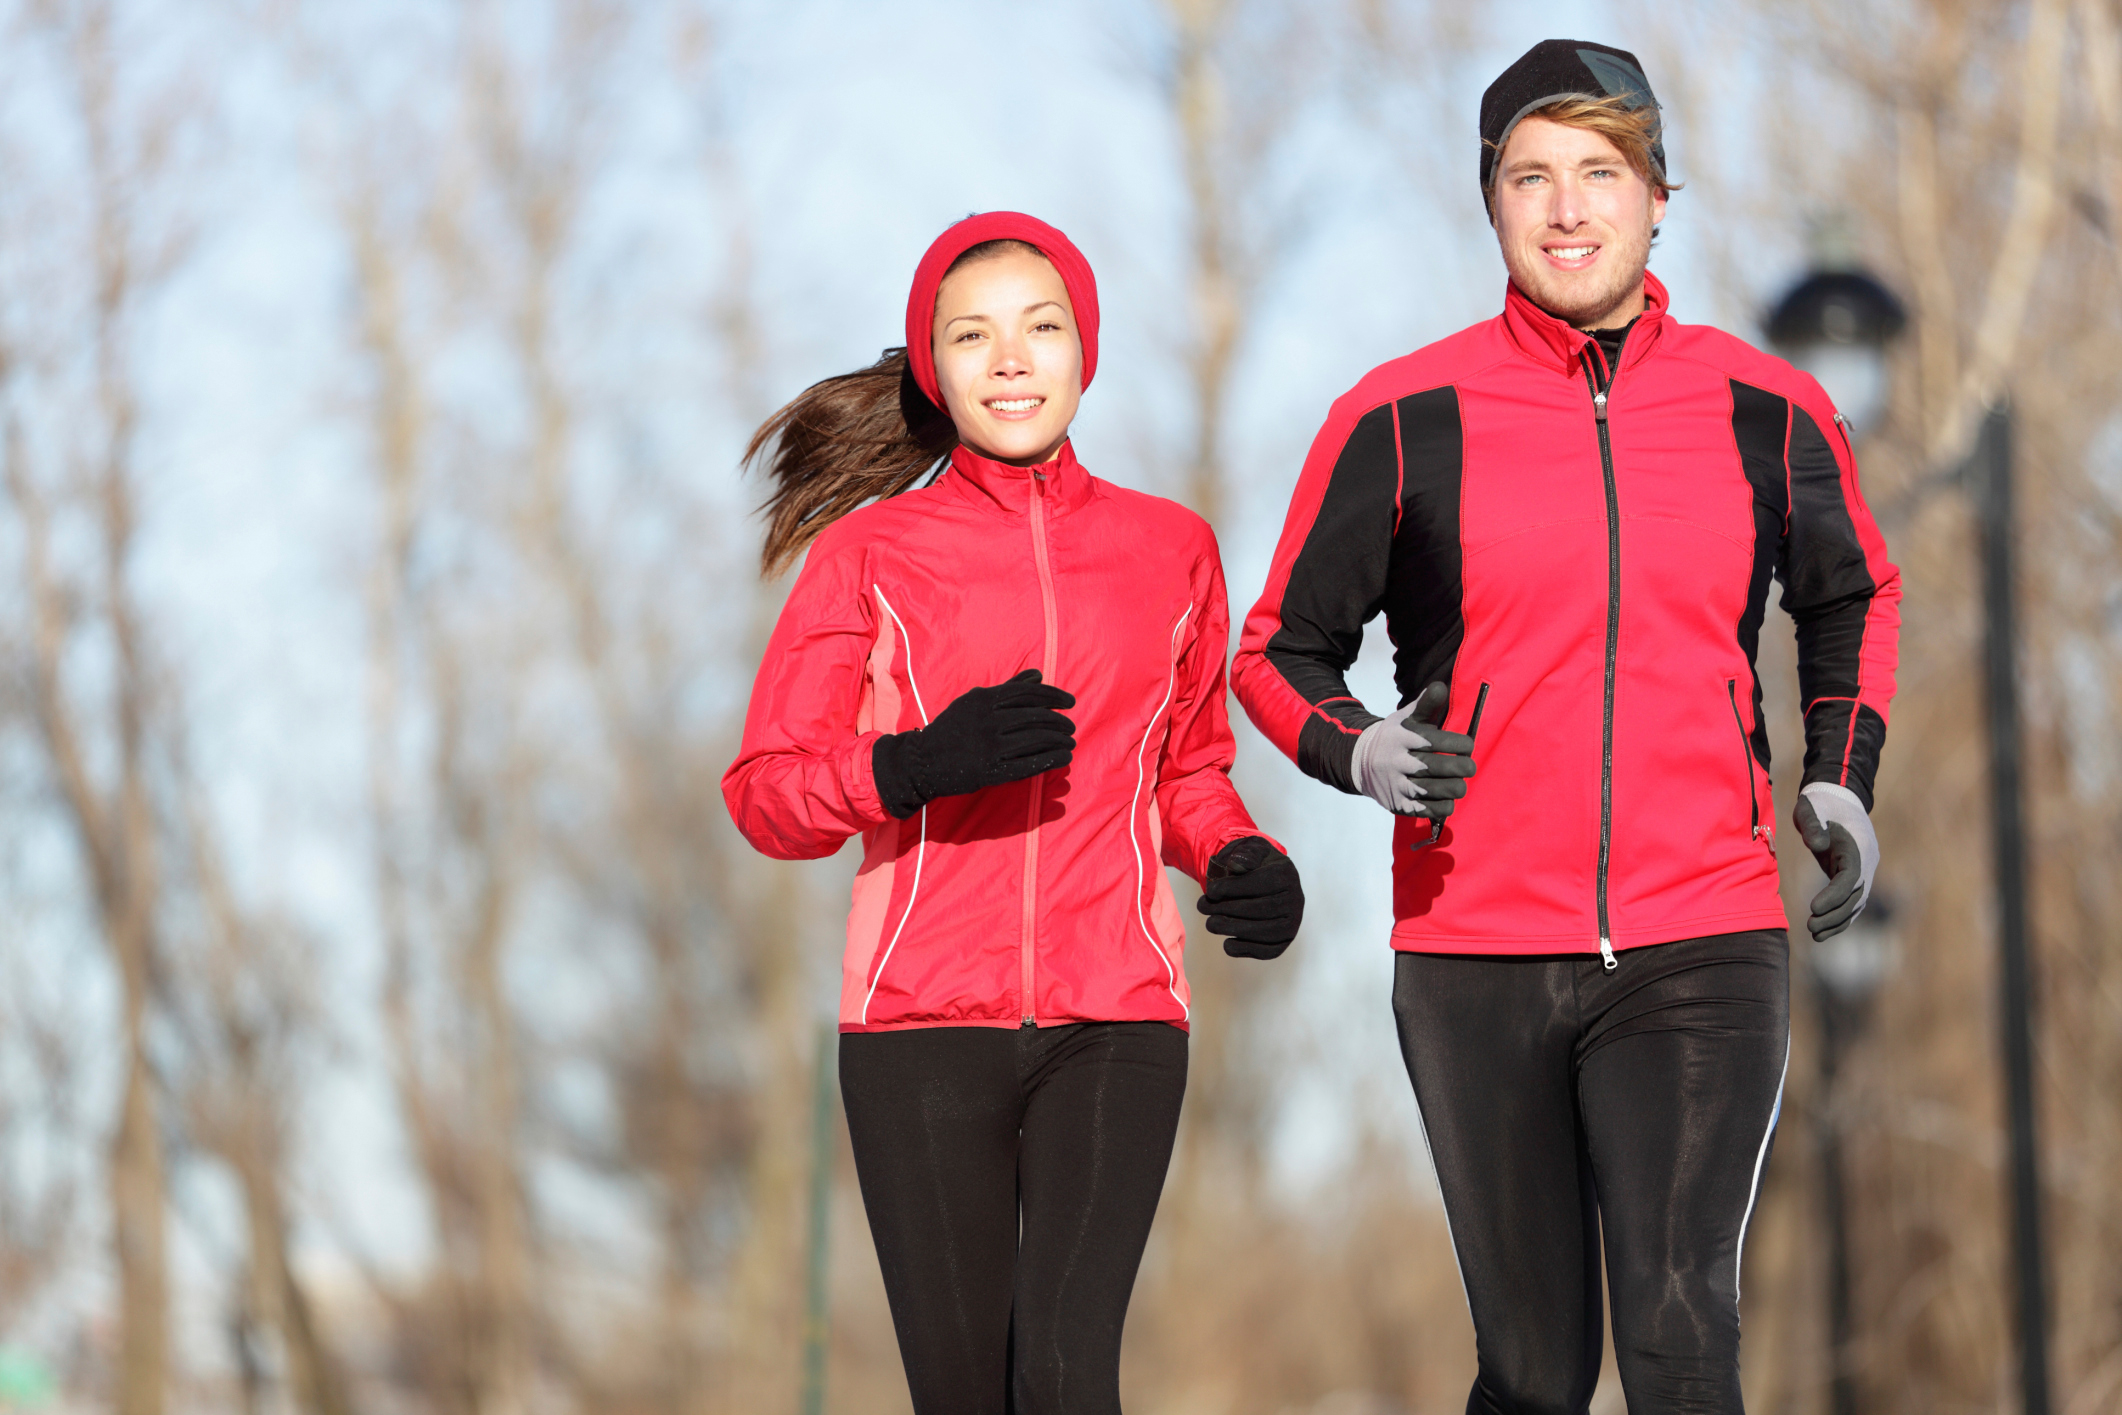 Valentine's Day Date Ideas - Go For A Run Together